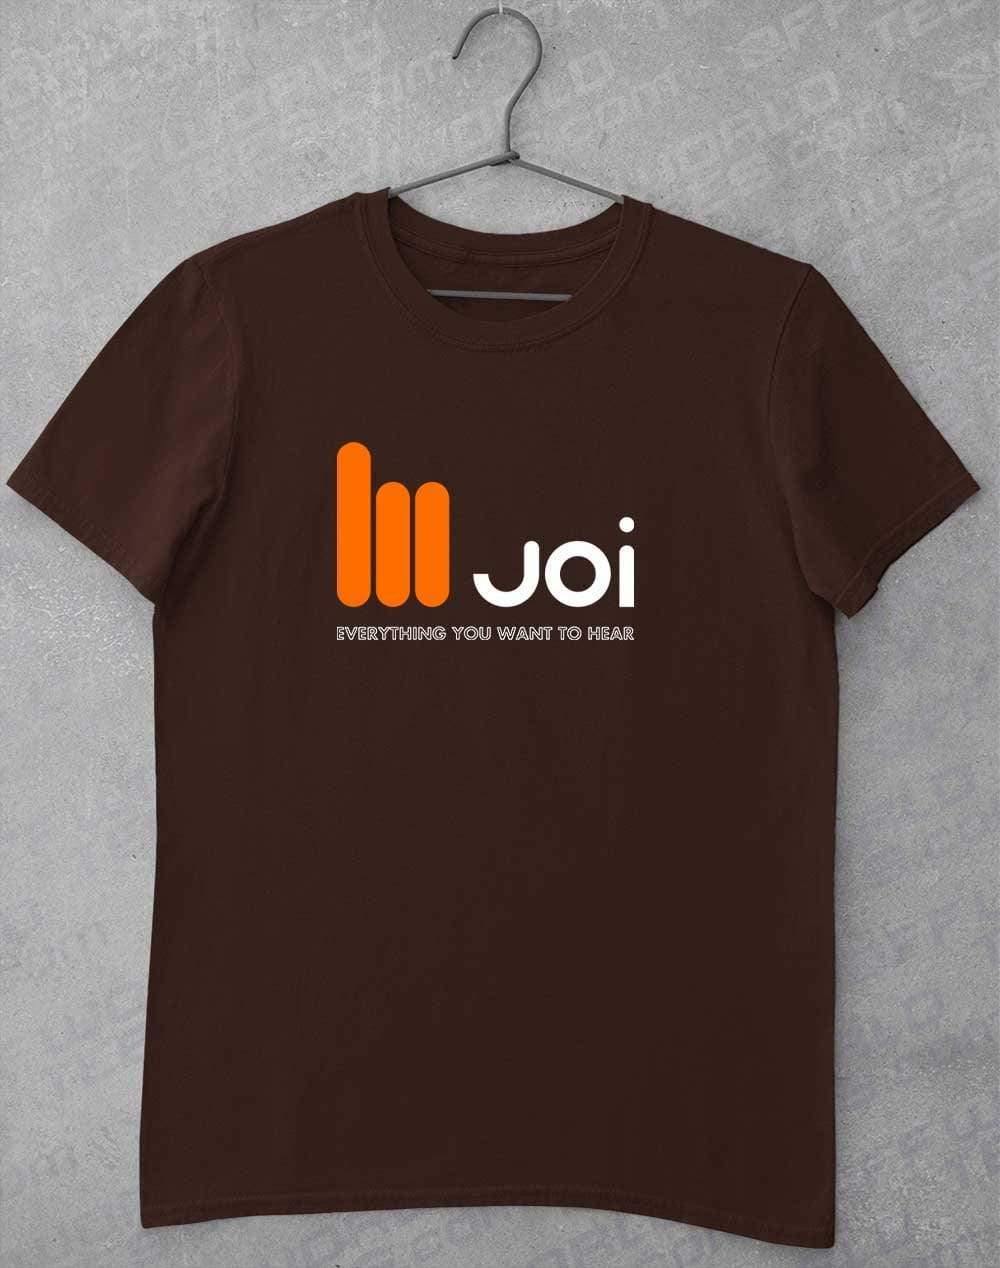 JOI Everything You Want to Hear T-Shirt S / Dark Chocolate  - Off World Tees